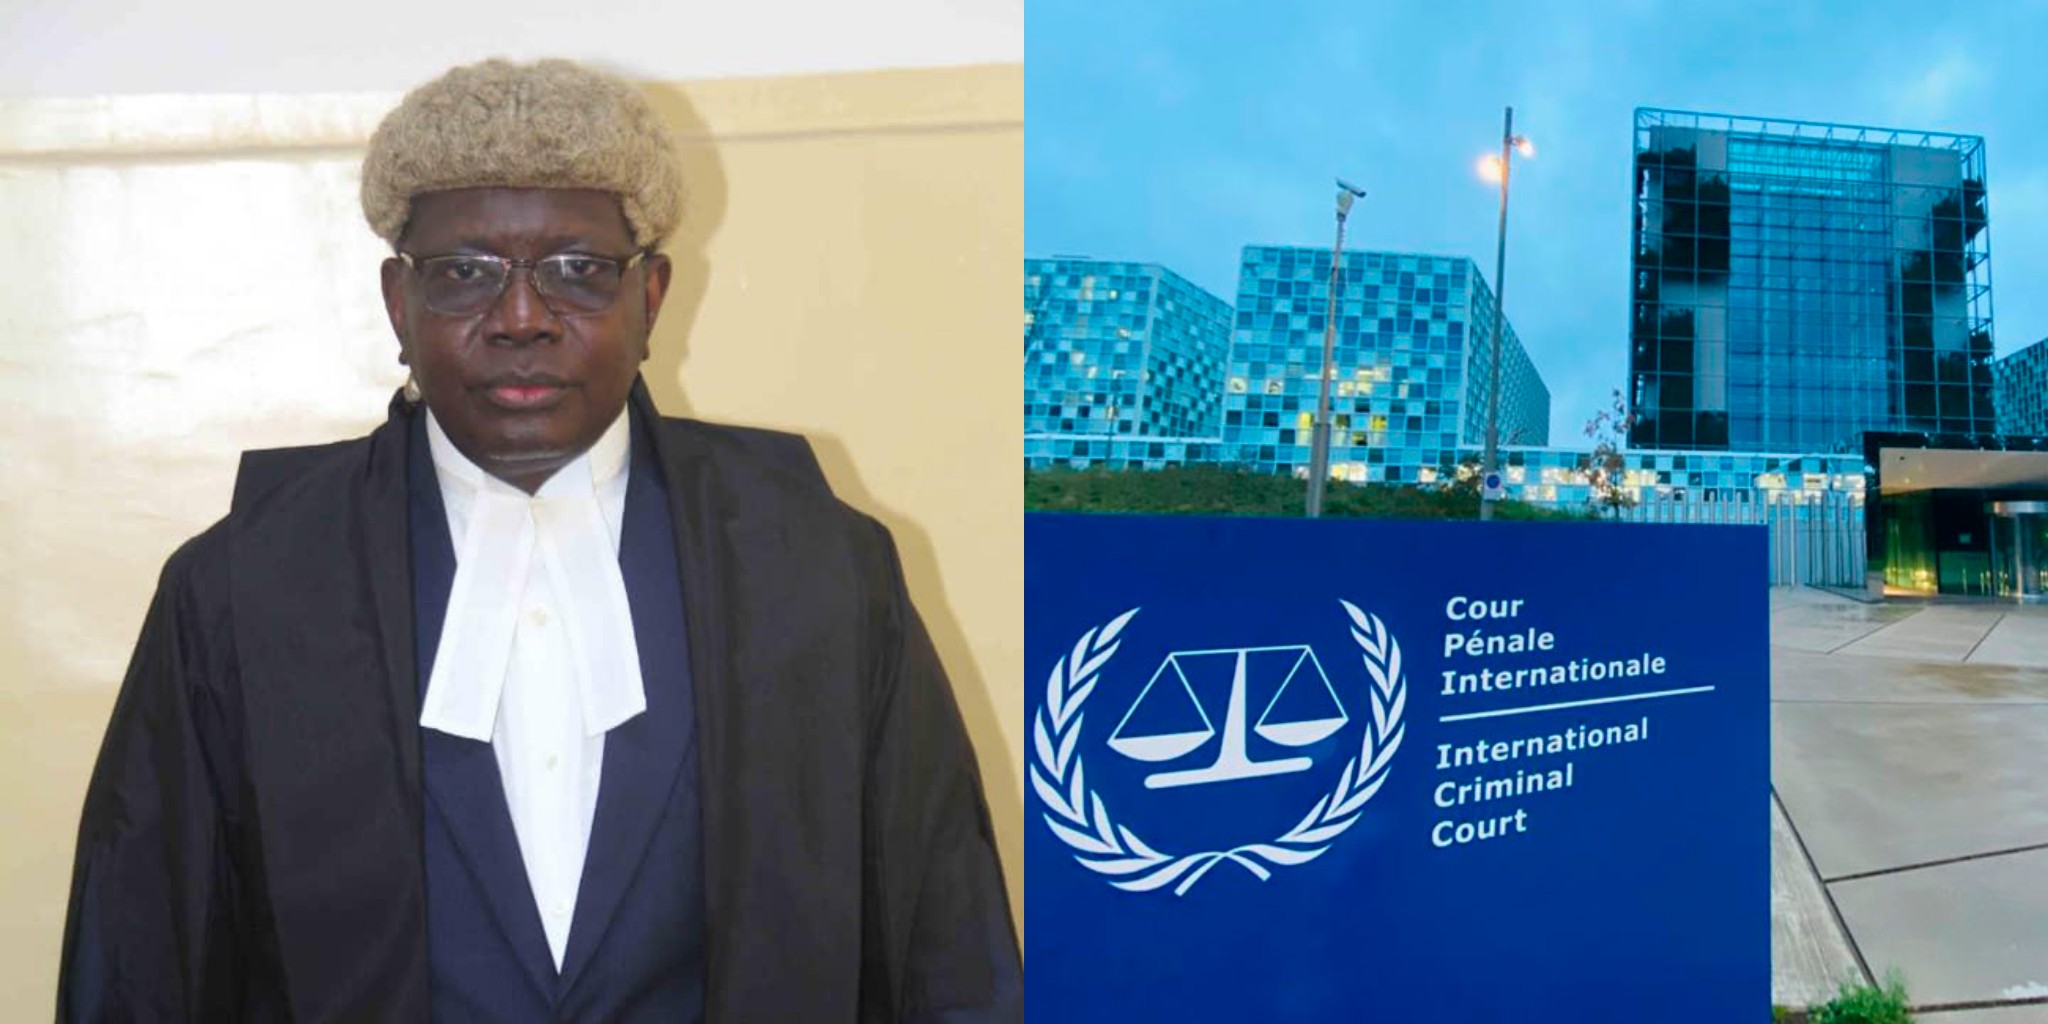 Sierra Leone Supreme Court’s Justice Roberts Elected as Vice President of The Hague